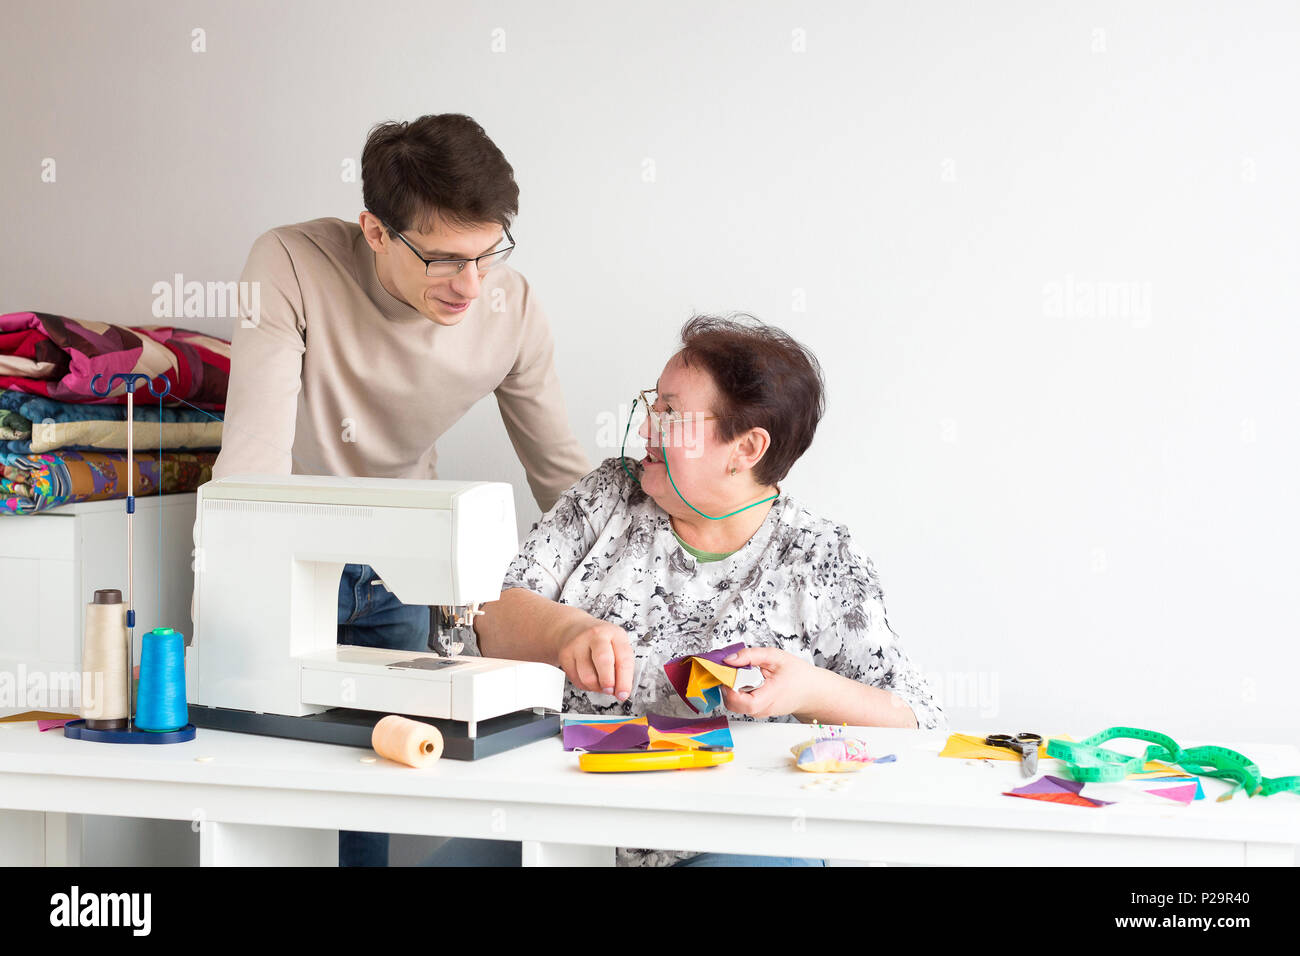 small business, design, manufactoring concept. by the old laughing woman there is a man, he is dressed in light sweater and eyeglasses, man is watchin Stock Photo